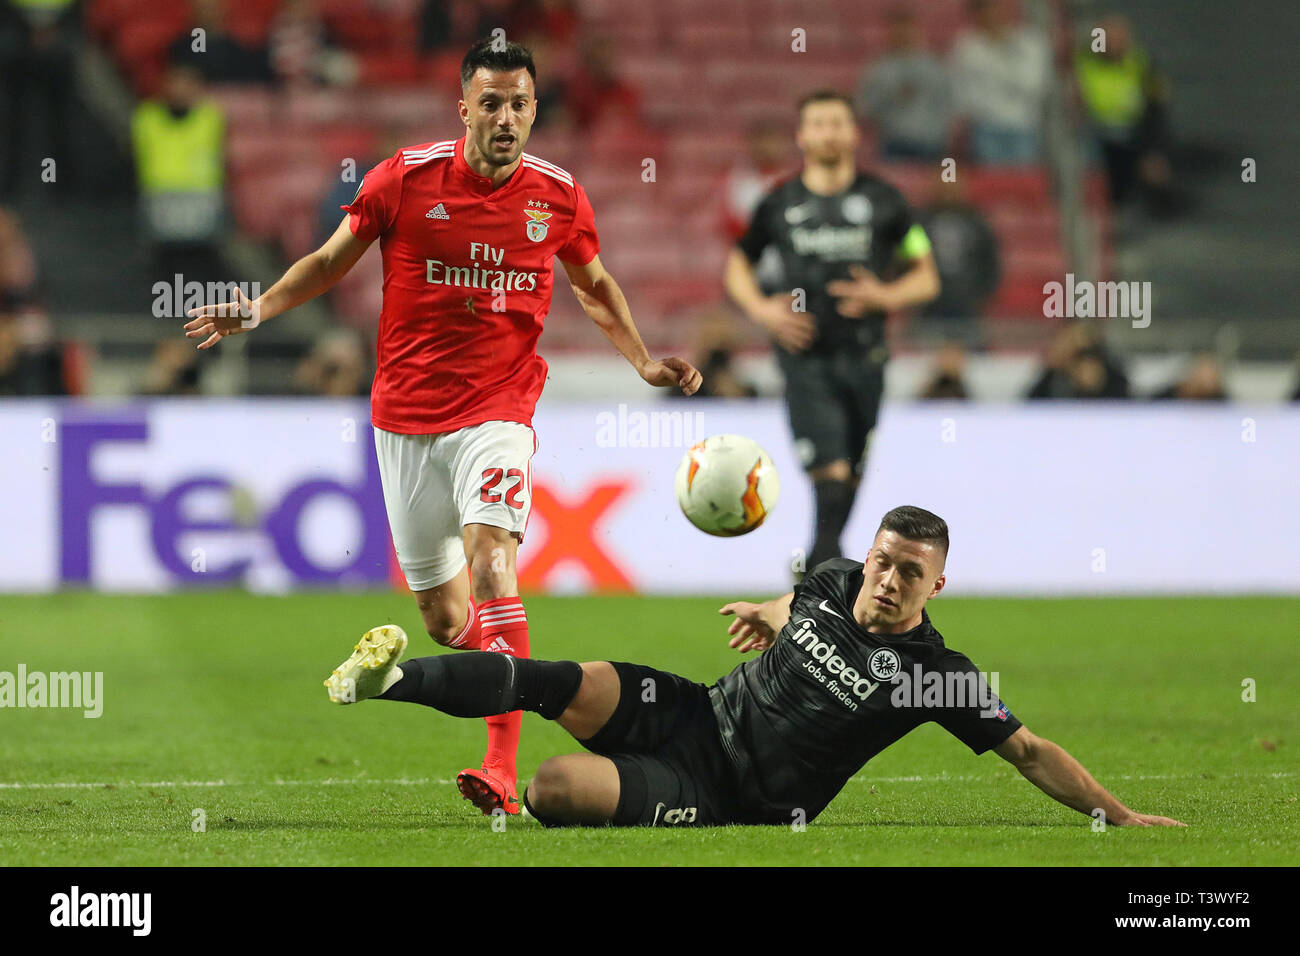 Andreas Samaris of SL Benfica (L) vies for the ball with Luka Jovi? of Eintracht Frankfurt (R) during the UEFA Europa League 2018/2019 football match between SL Benfica vs Eintracht Frankfurt.  (Final score: SL Benfica 4 - 2 Eintracht Frankfurt) Stock Photo